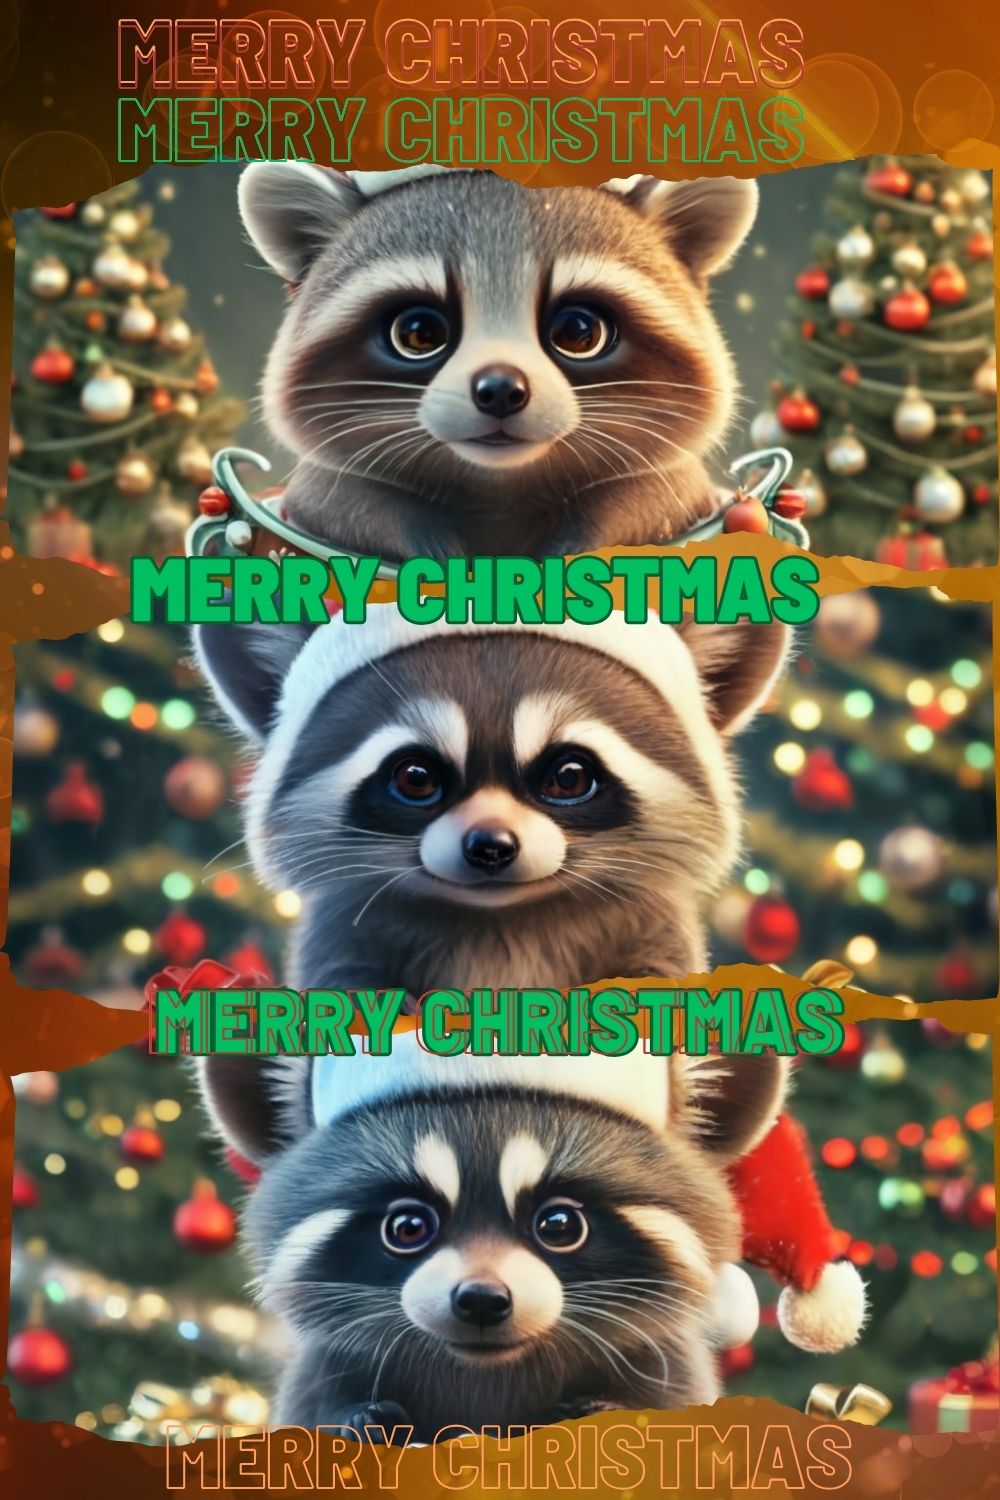 "Christmas Charm: Cute Animal Holiday Image for Sale" pinterest preview image.